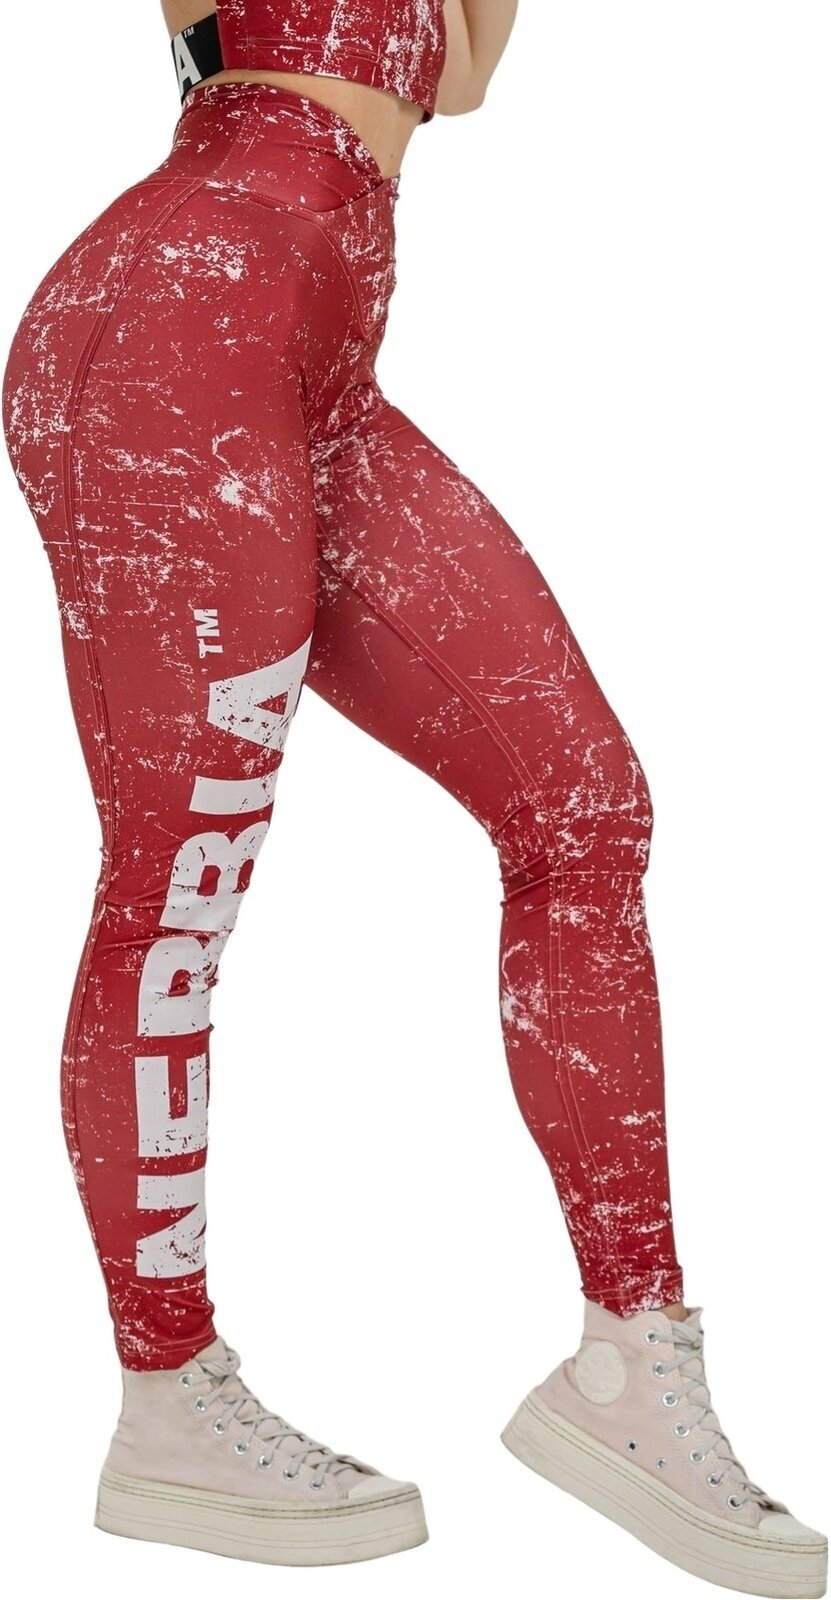 Fitness Hose Nebbia Workout Leggings Rough Girl Red L Fitness Hose